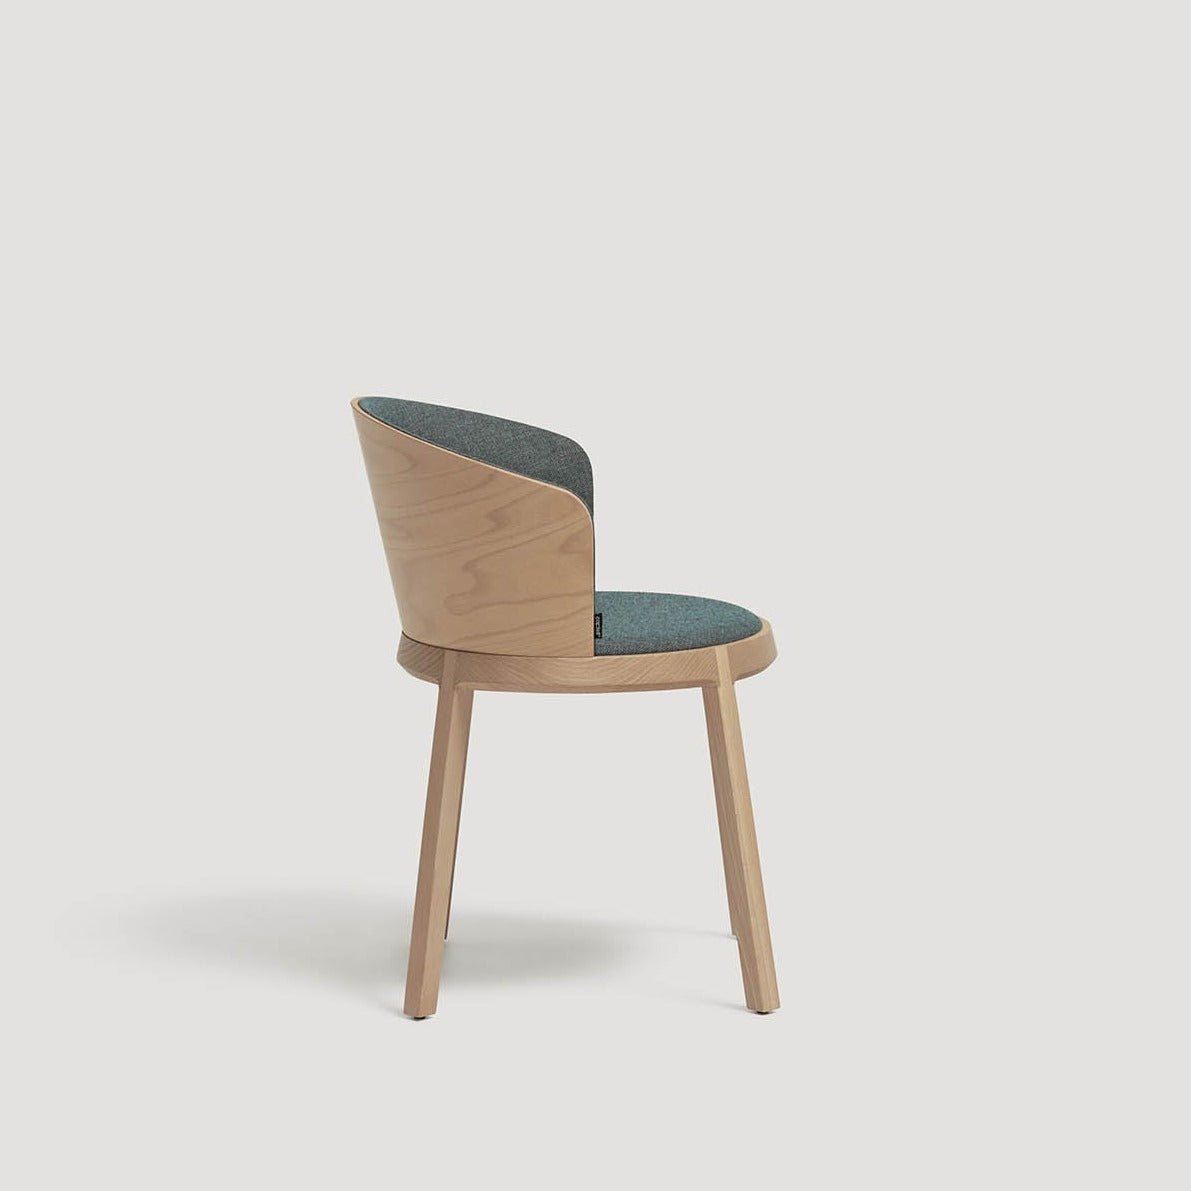 SILLA ARO Chair side view, natural base and backrest